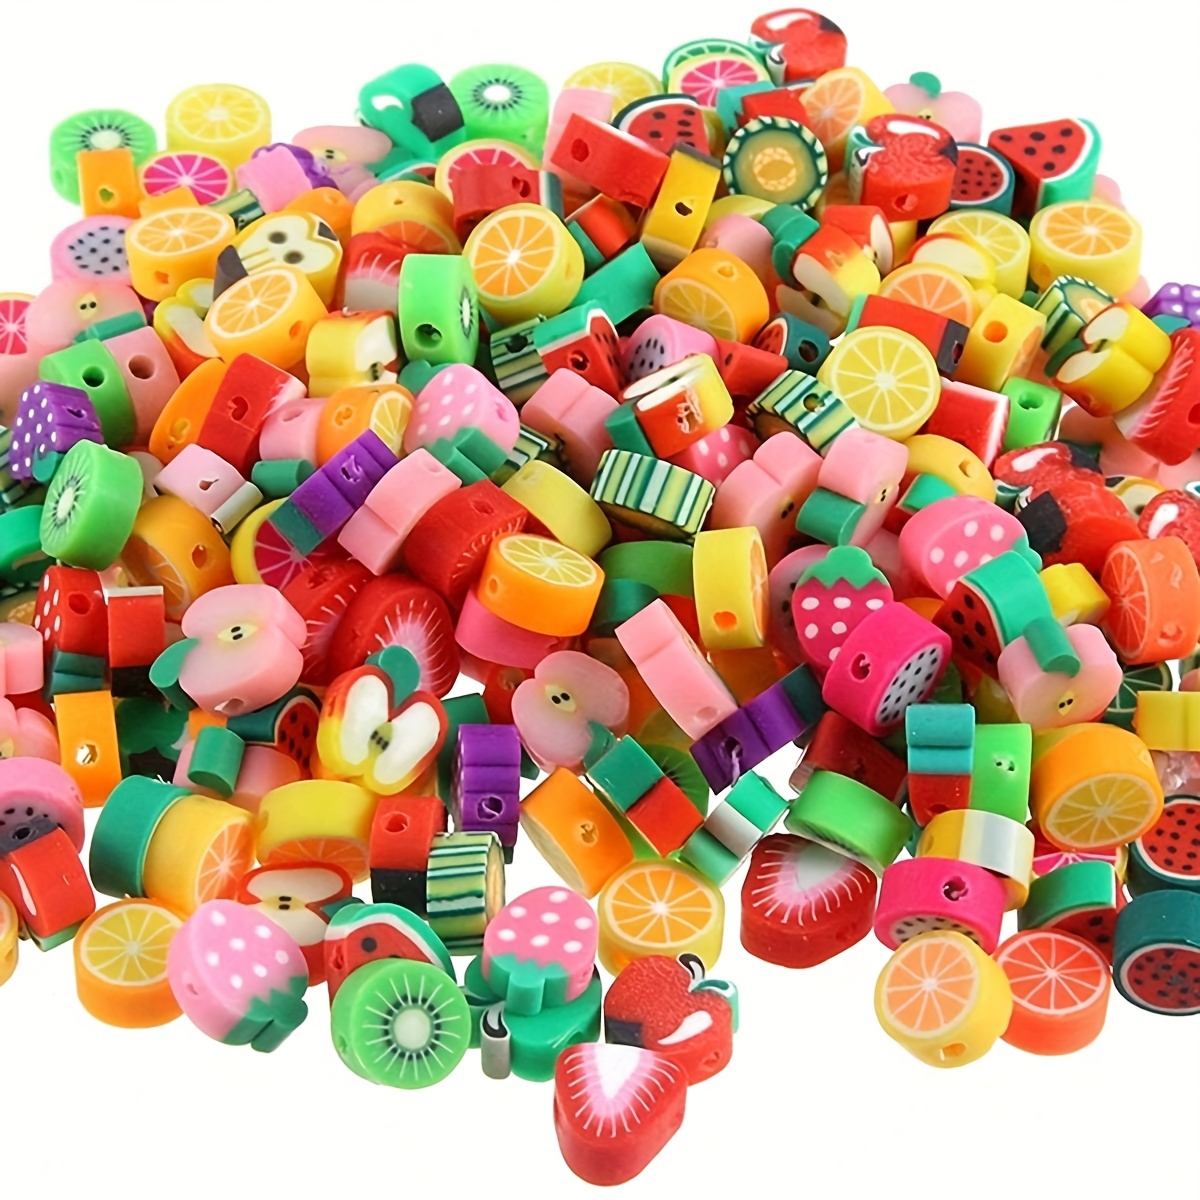 100 Mixed Bright Candy Color 10mm Cube Wood Alphabet Letter Beads